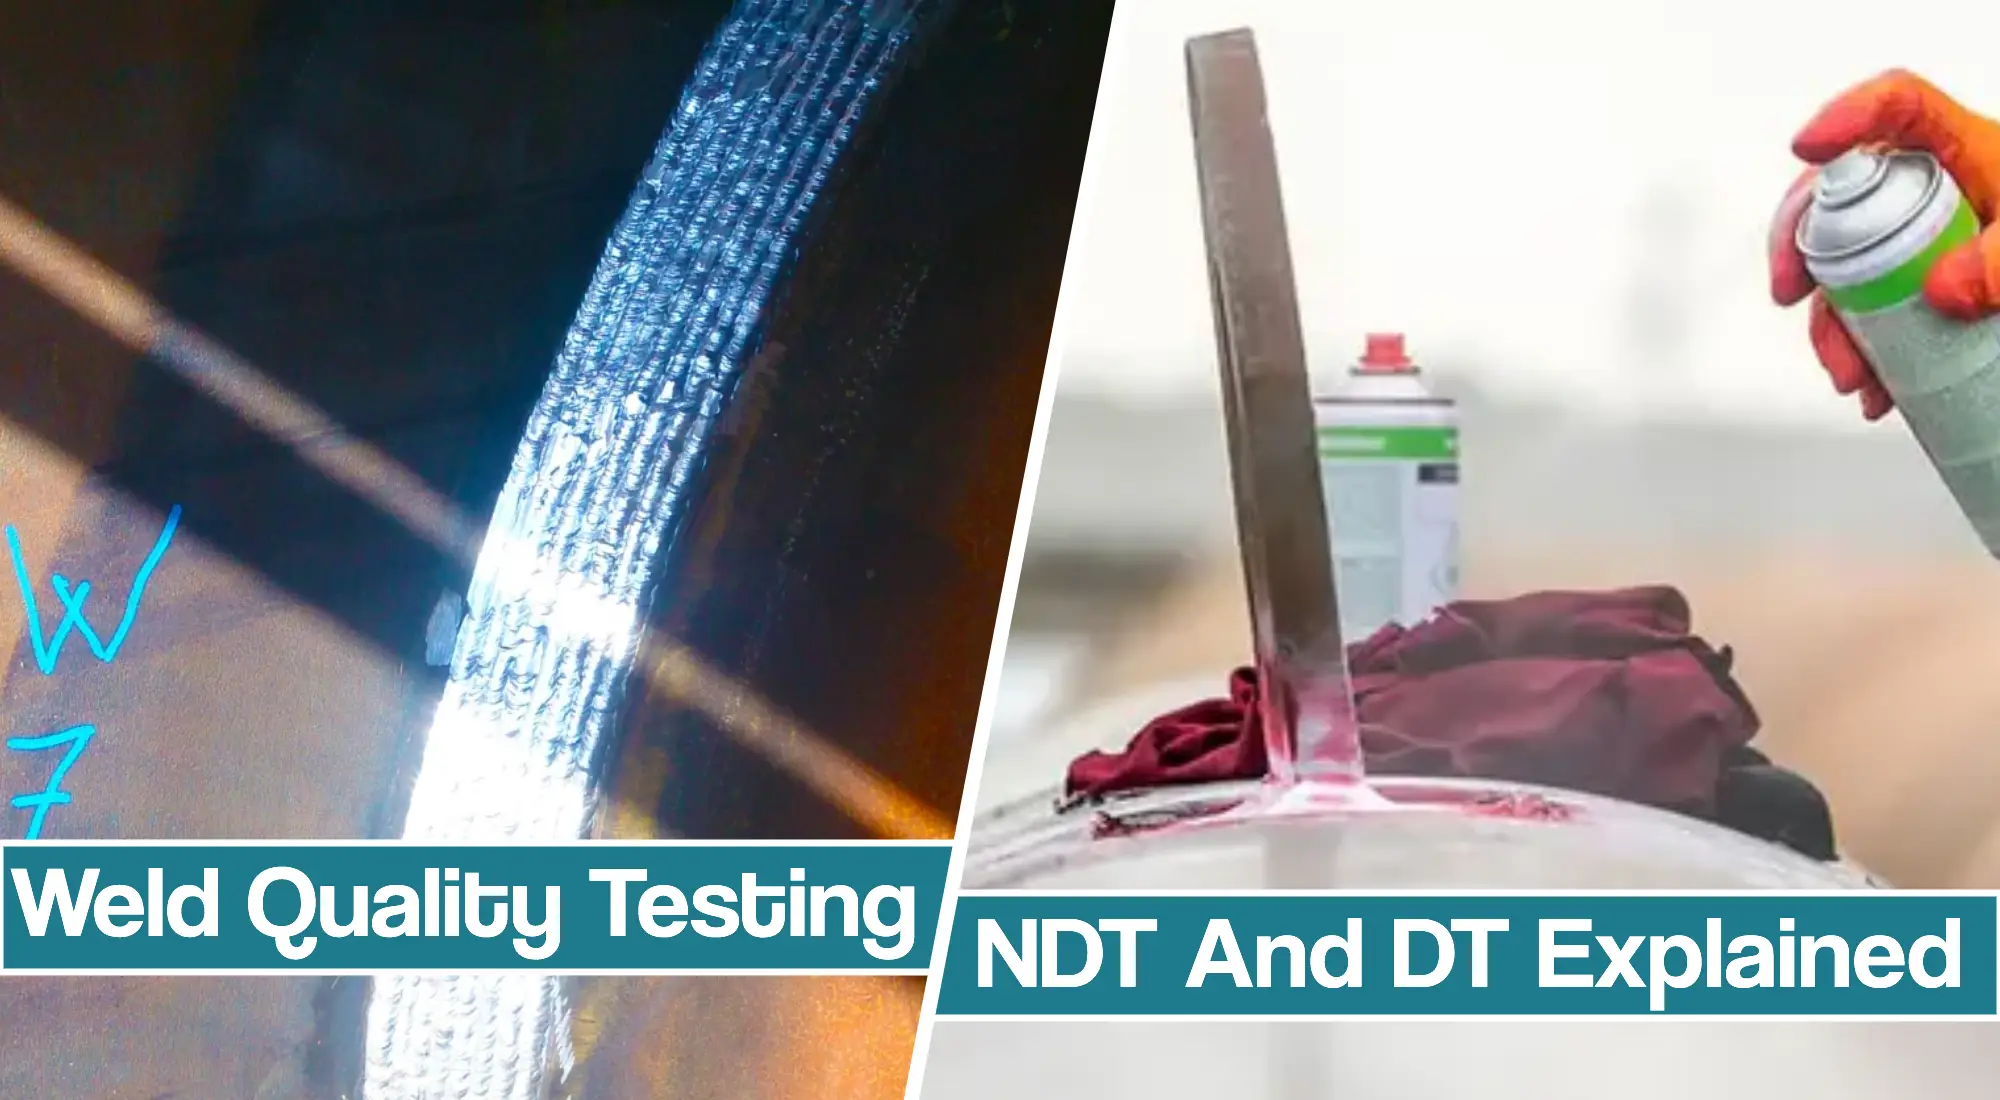 Featured image for the Weld Quality Testing article